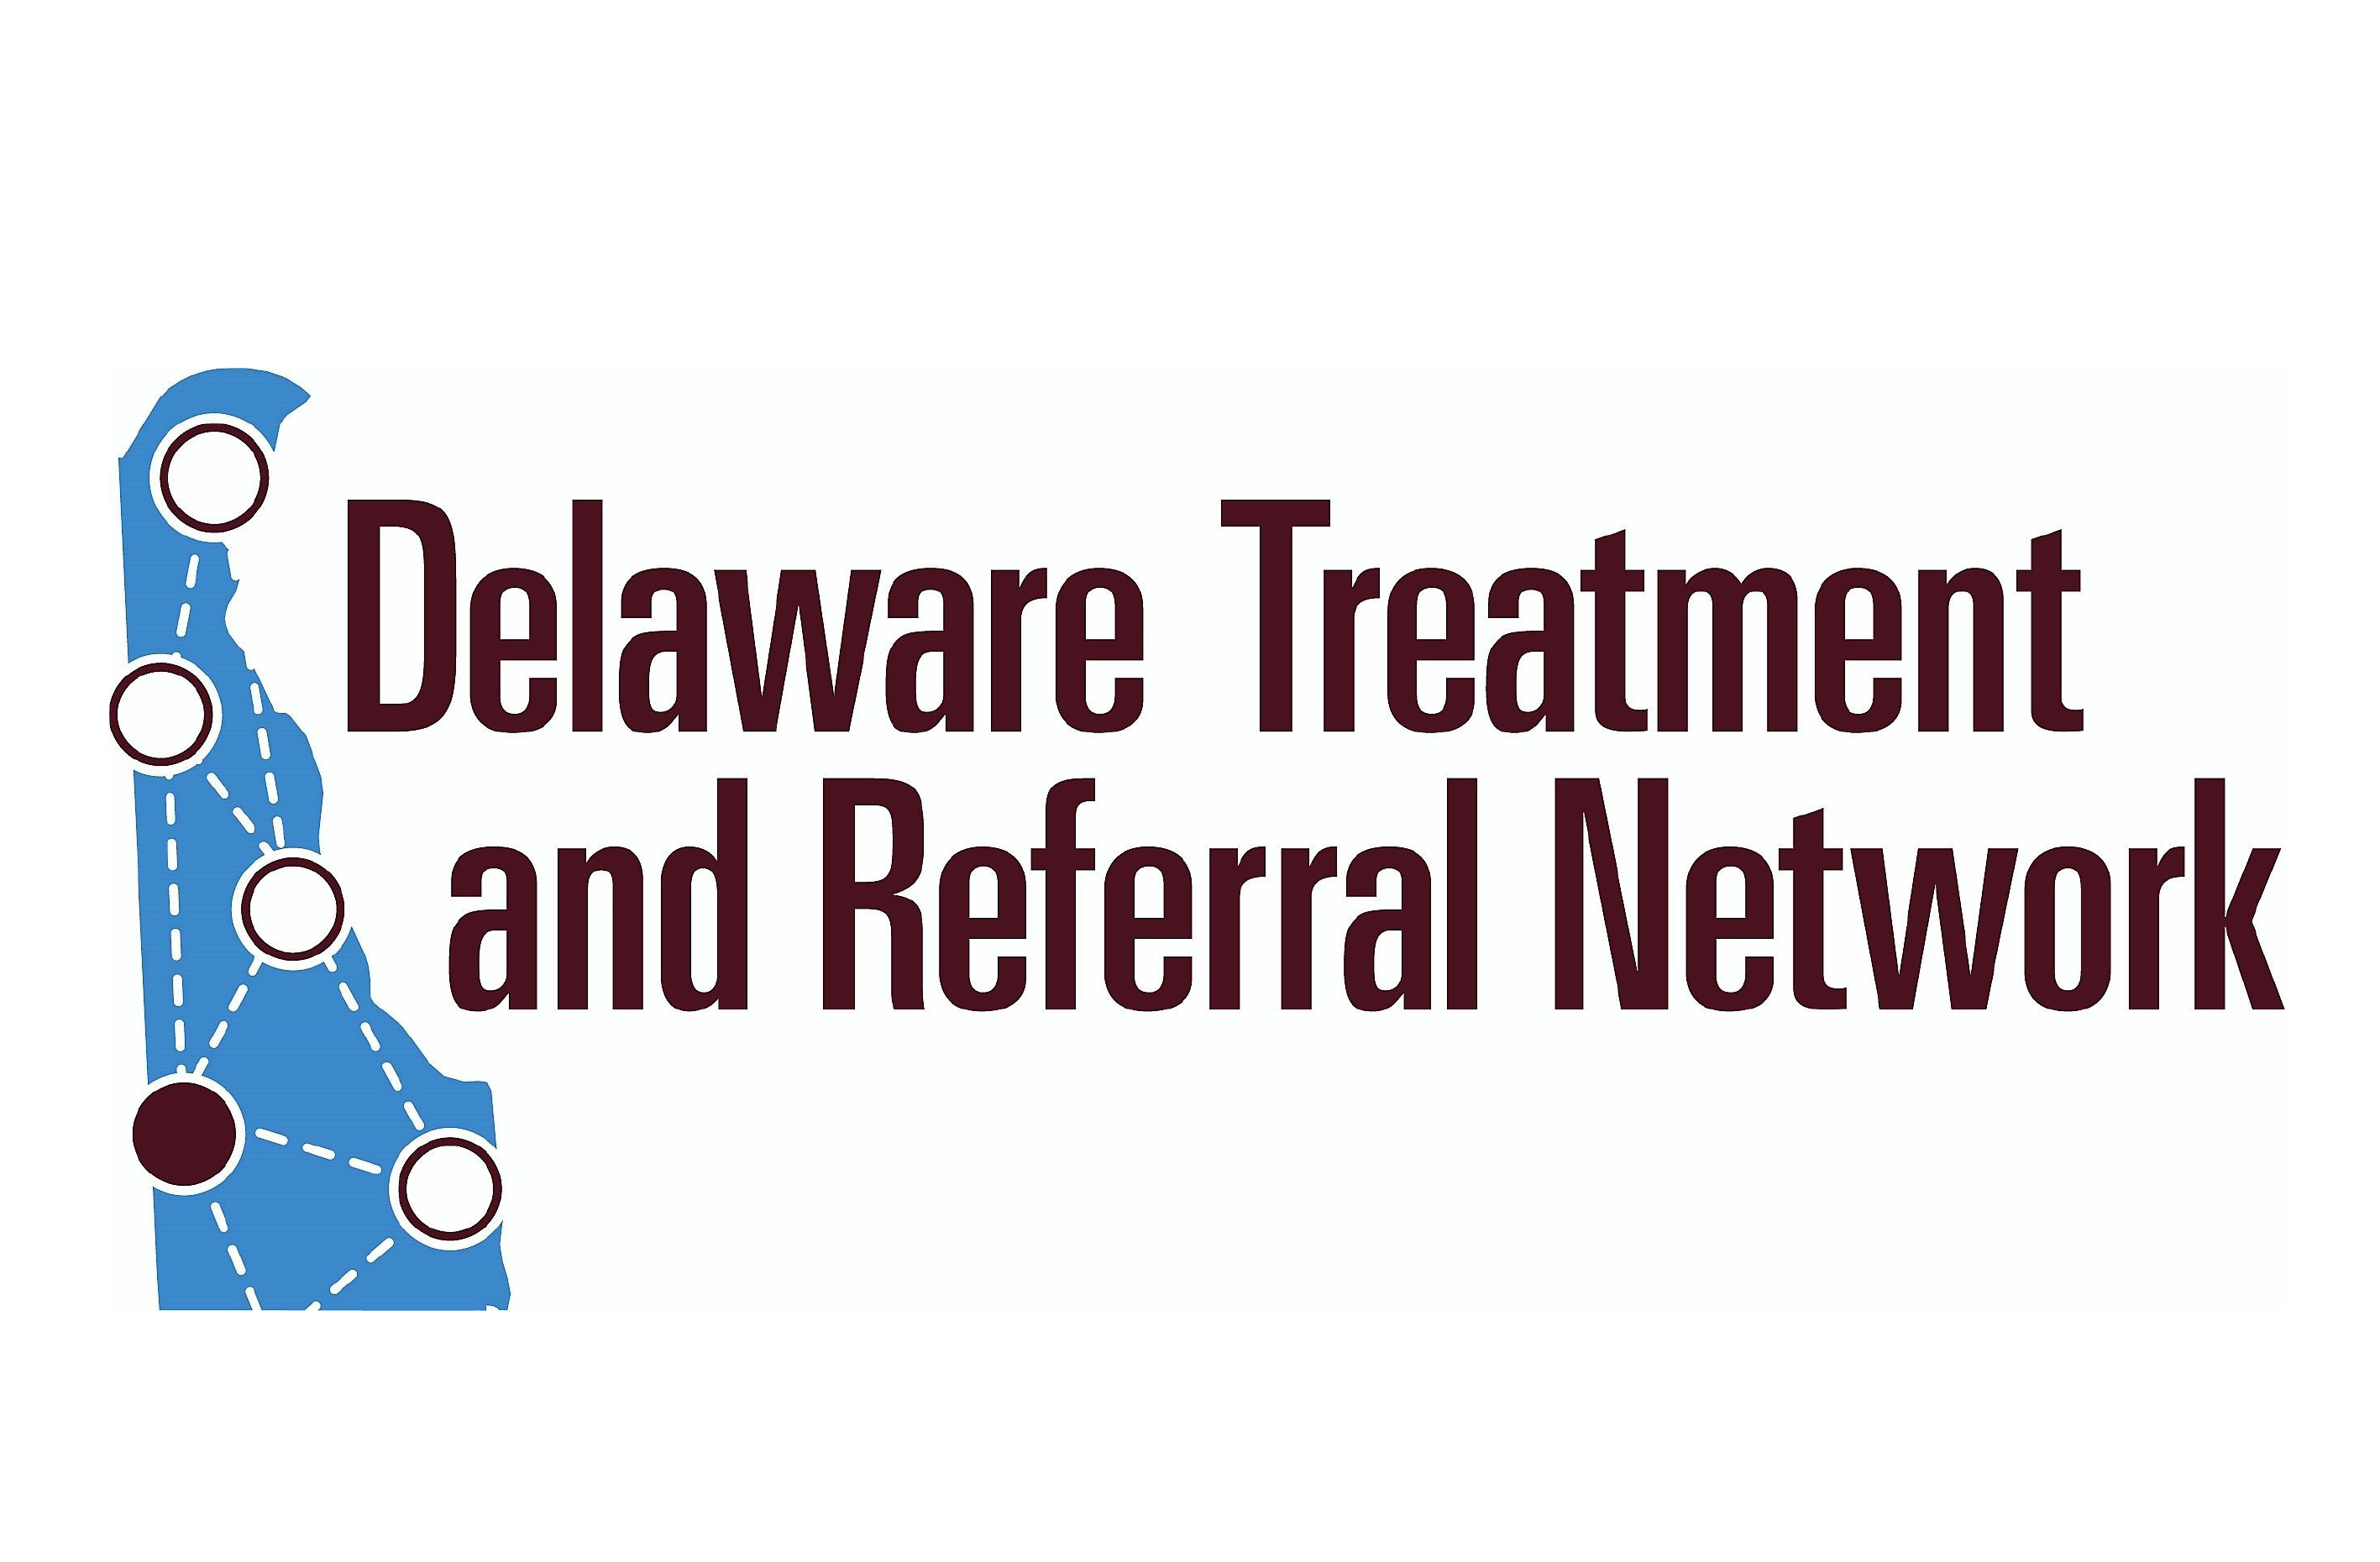 Delaware Department of Health and Social Services (DHSS)